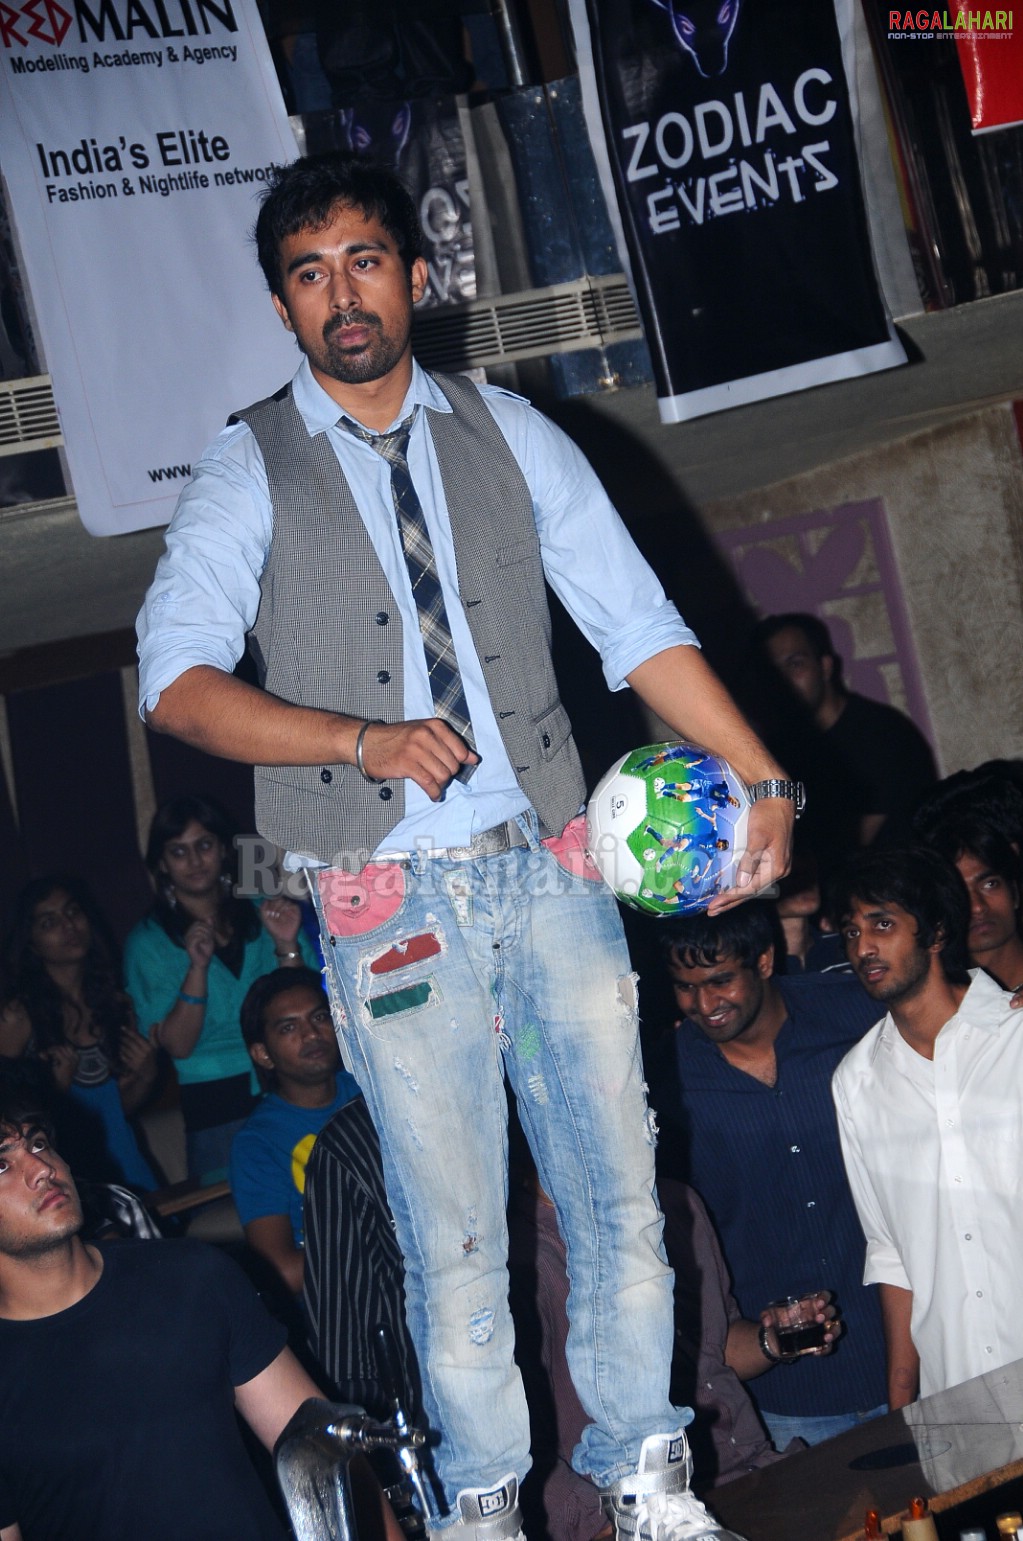 Fashion Show @ Bottles and Chimney, Hyd